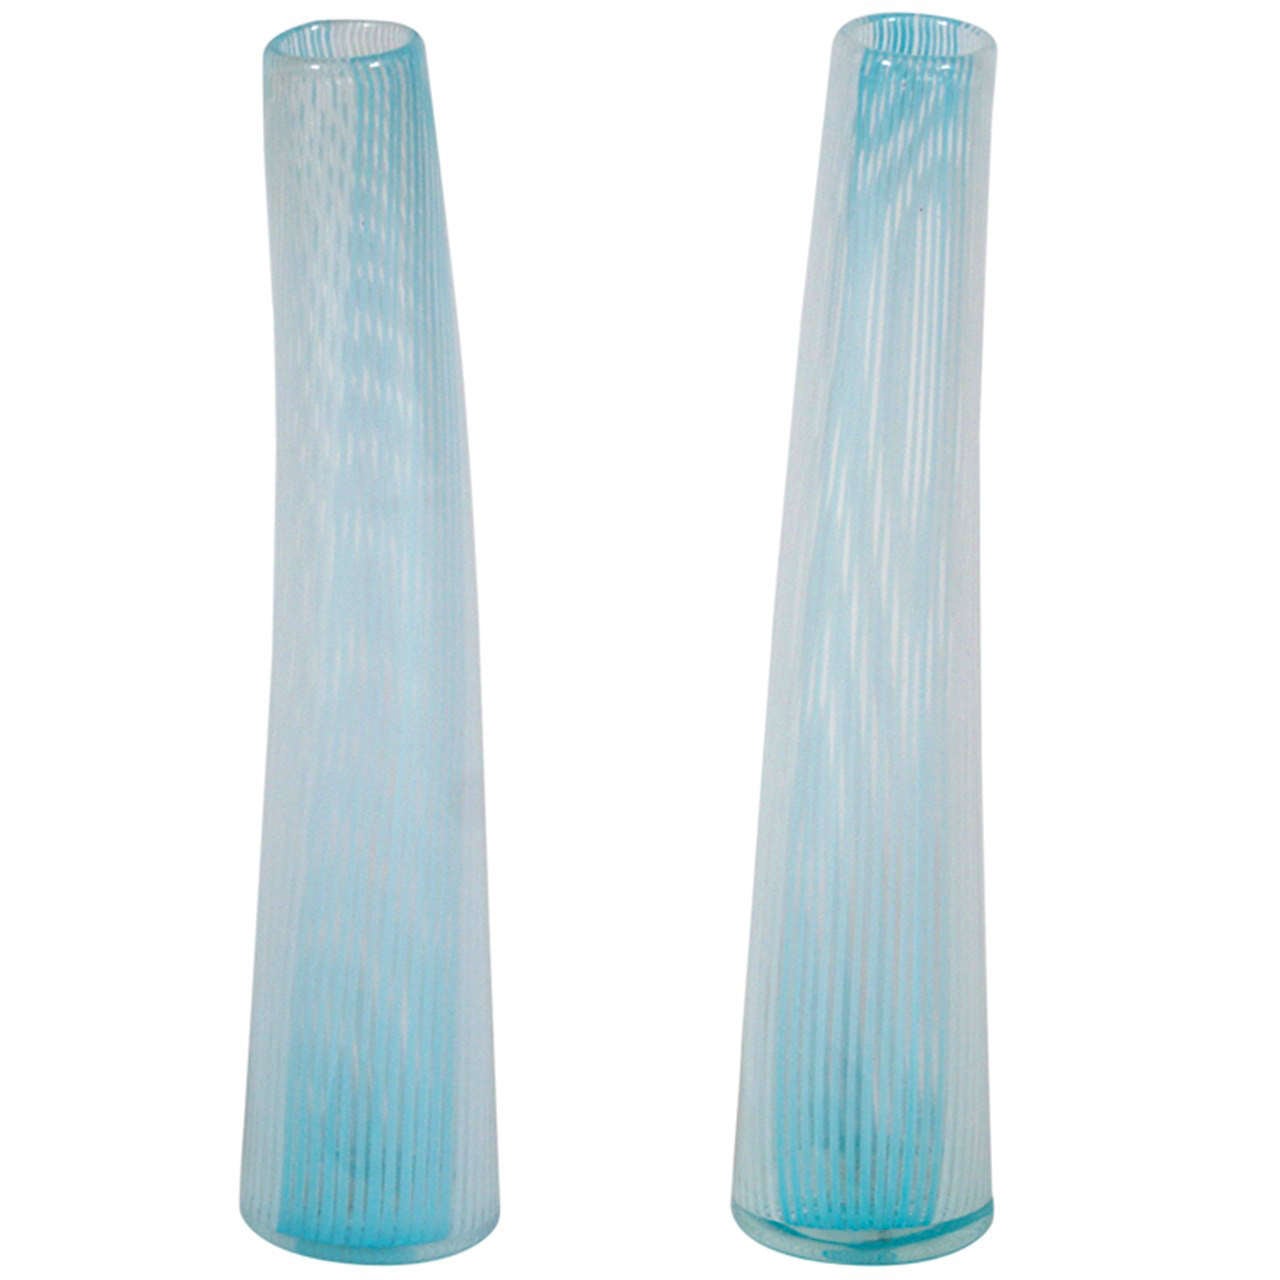 Two Complementary Murano Vases